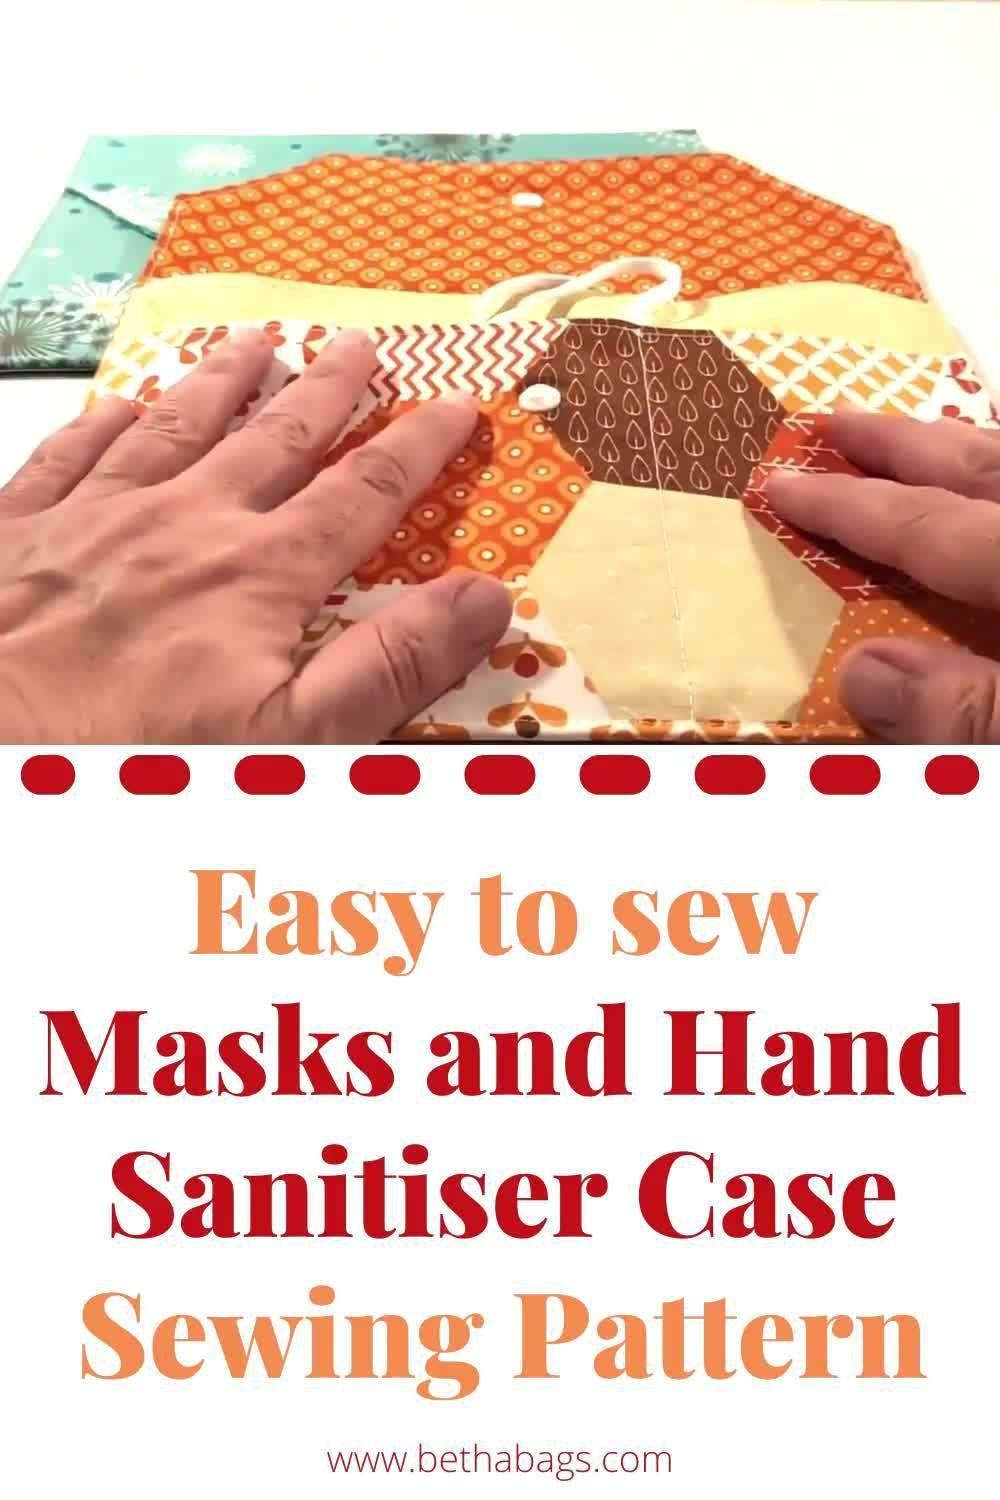 Masks and Hand Sanitiser Case Sewing Pattern PDF in A4 and | Etsy - Masks and Hand Sanitiser Case Sewing Pattern PDF in A4 and | Etsy -   17 fabric crafts to sell gift ideas